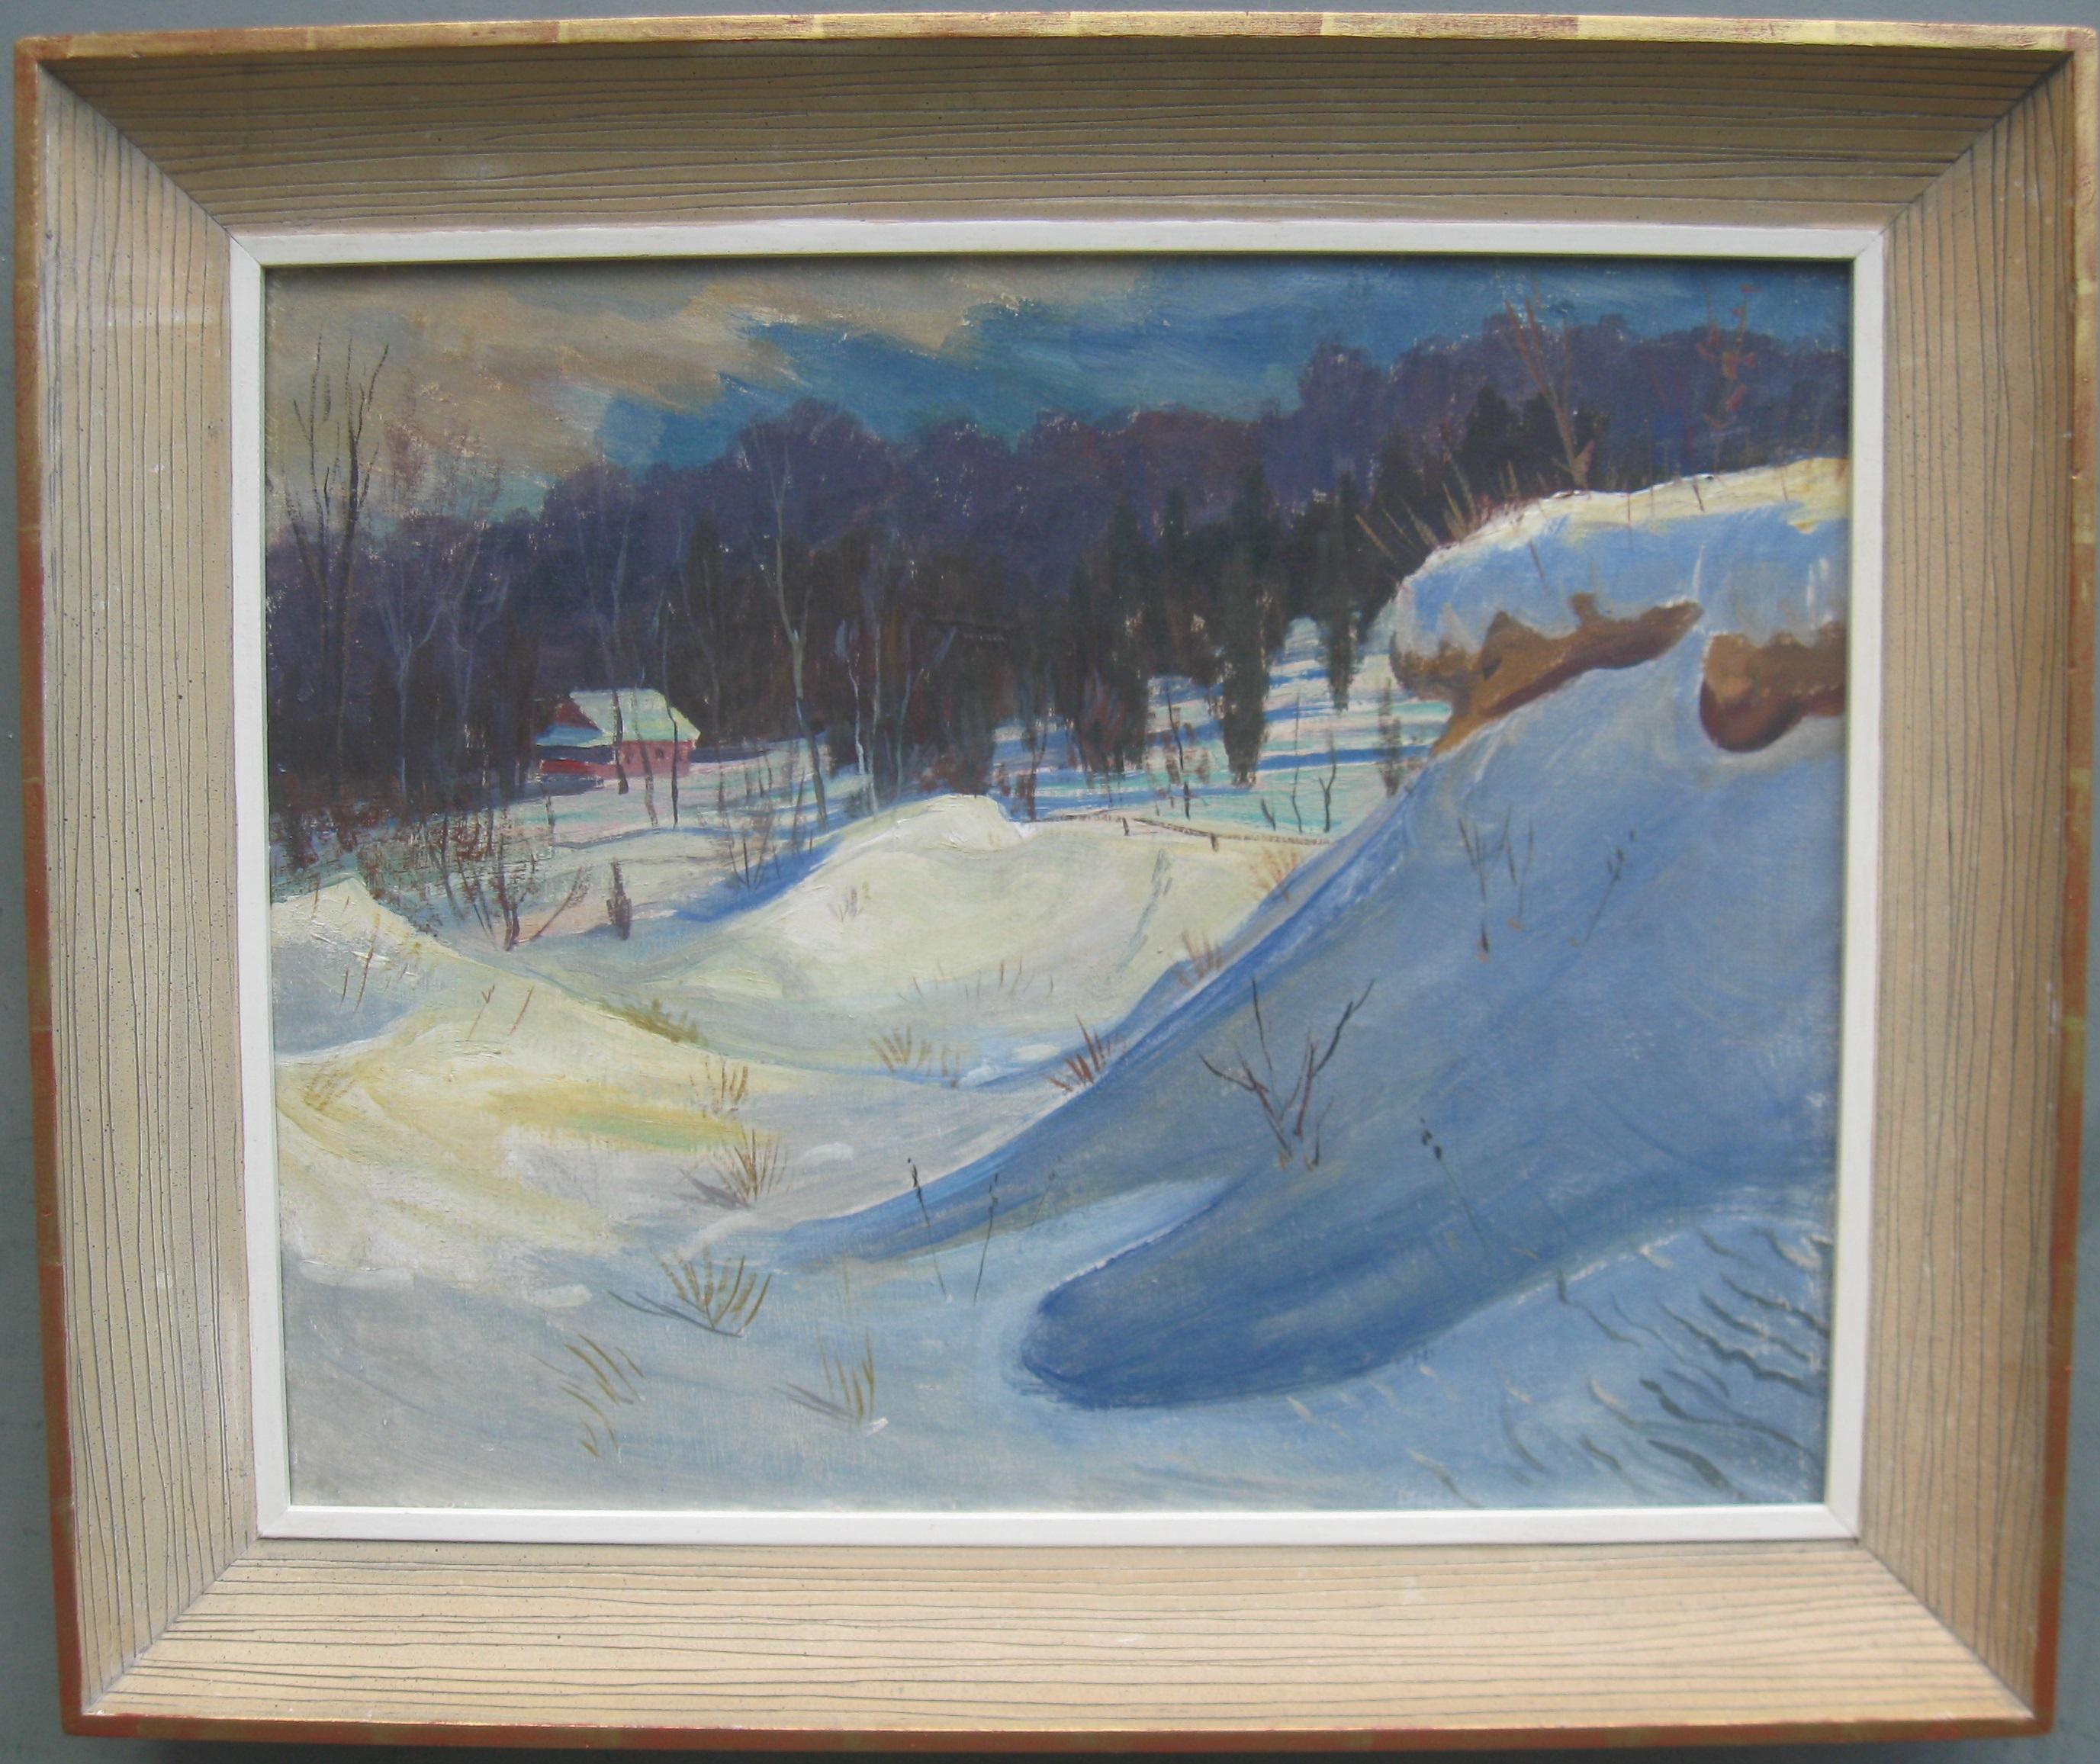 Unknown Landscape Painting - Snowdrifts in a Wooded Landscape oil on canvas circa 1950's